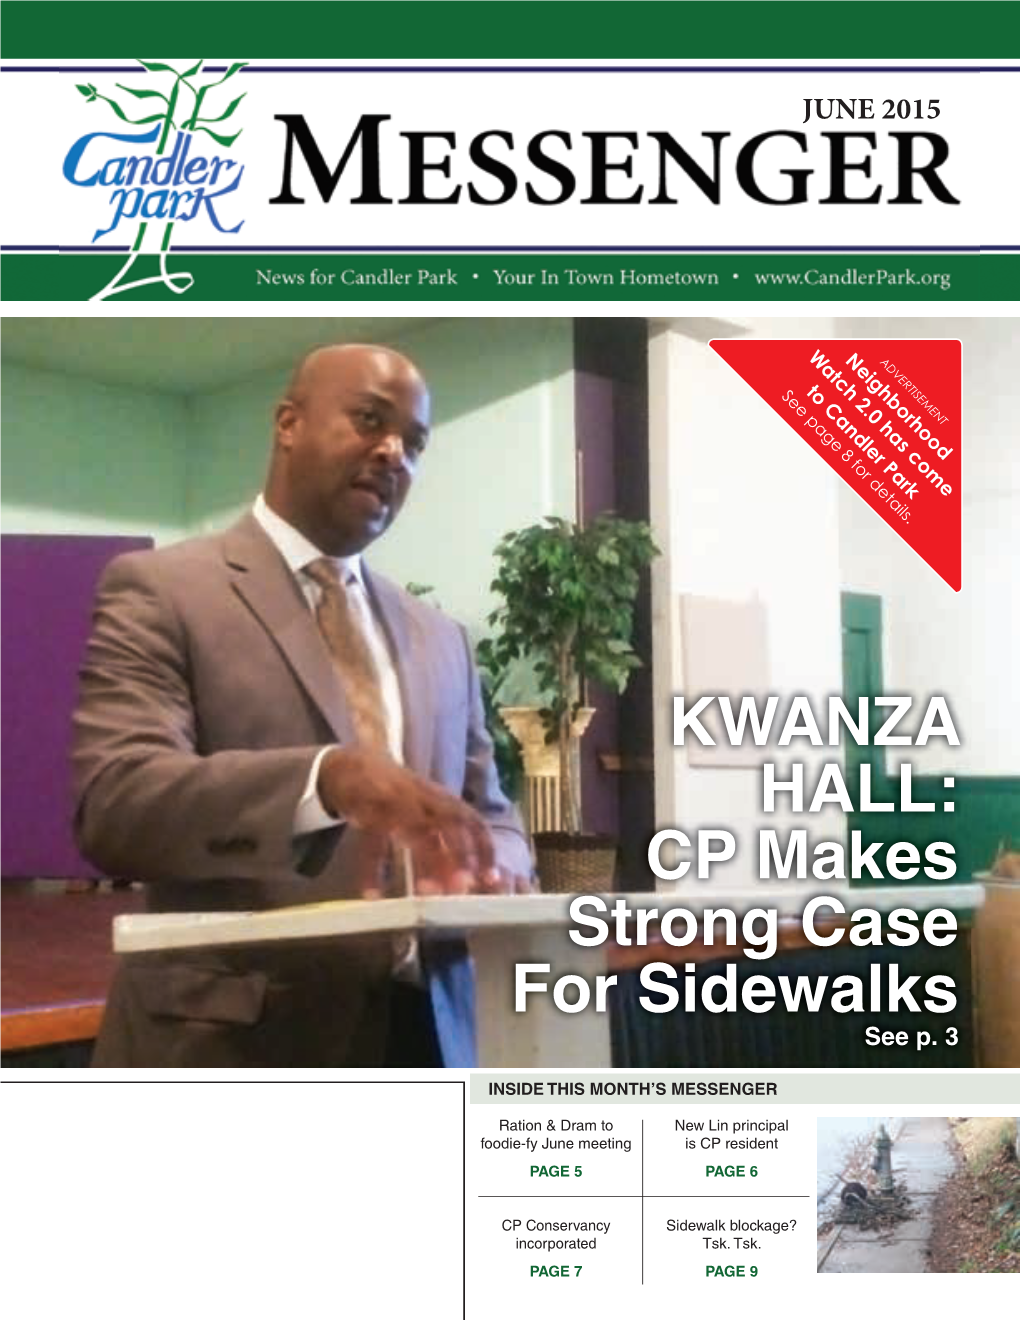 KWANZA HALL: CP Makes Strong Case for Sidewalks See P